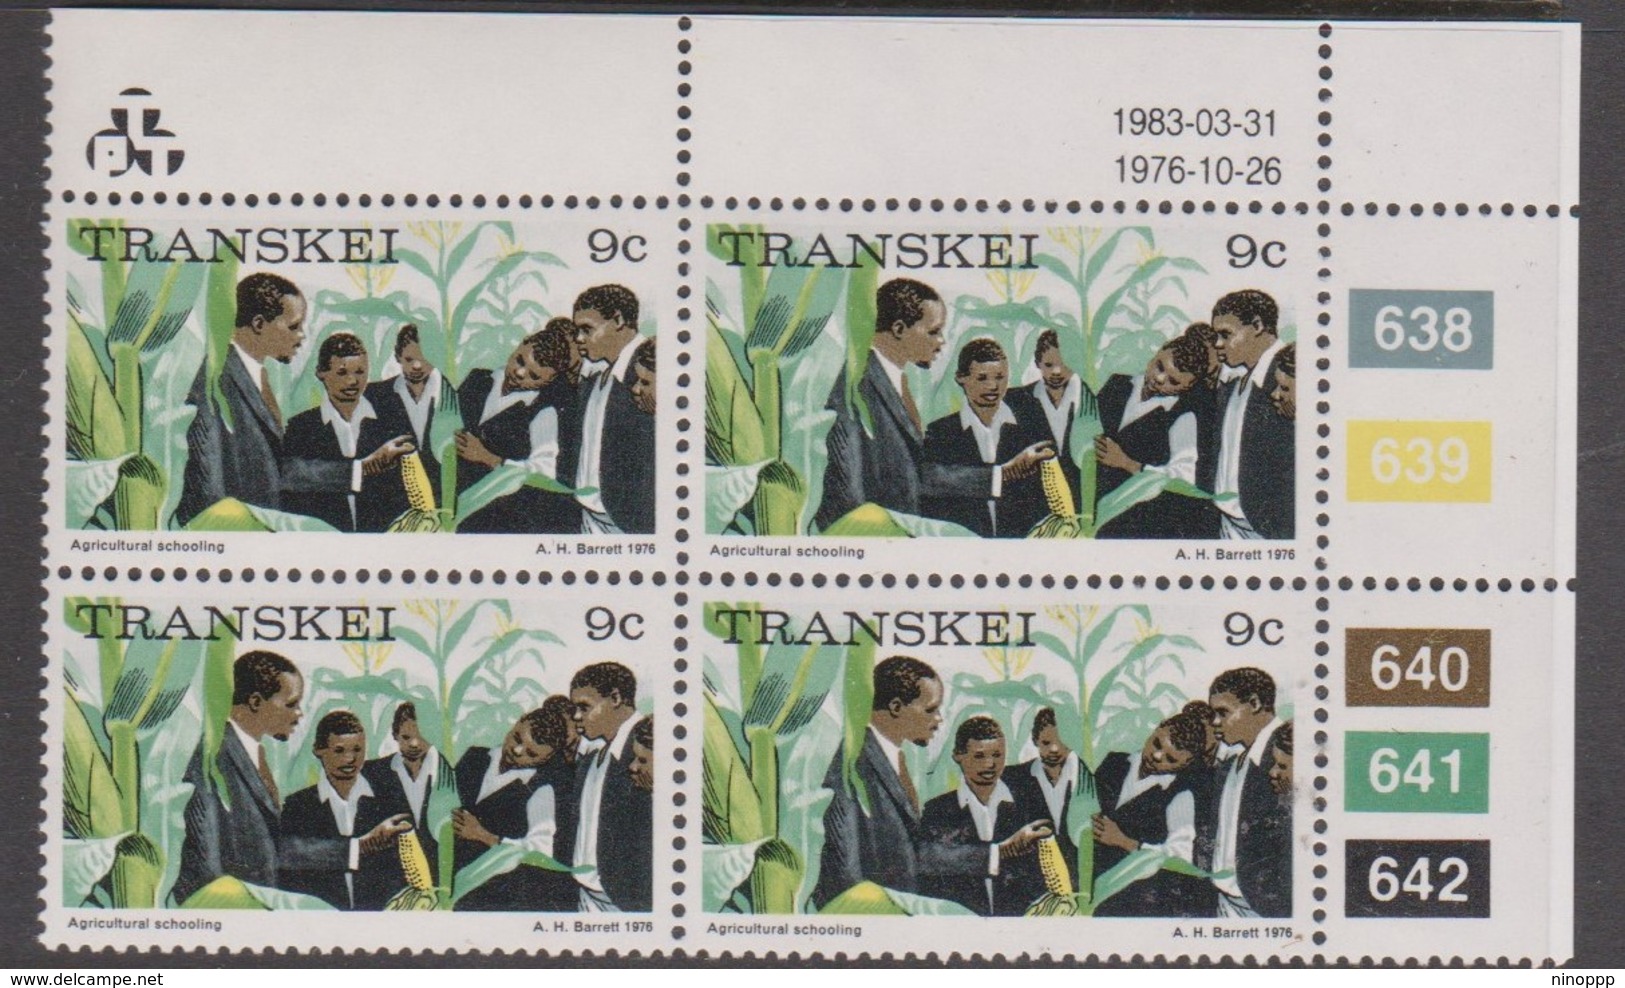 South Africa-Transkei SG R9 1983 Scenes 9cAgriculture Schooling,block 4 Reprint, Mint Never Hinged - Transkei